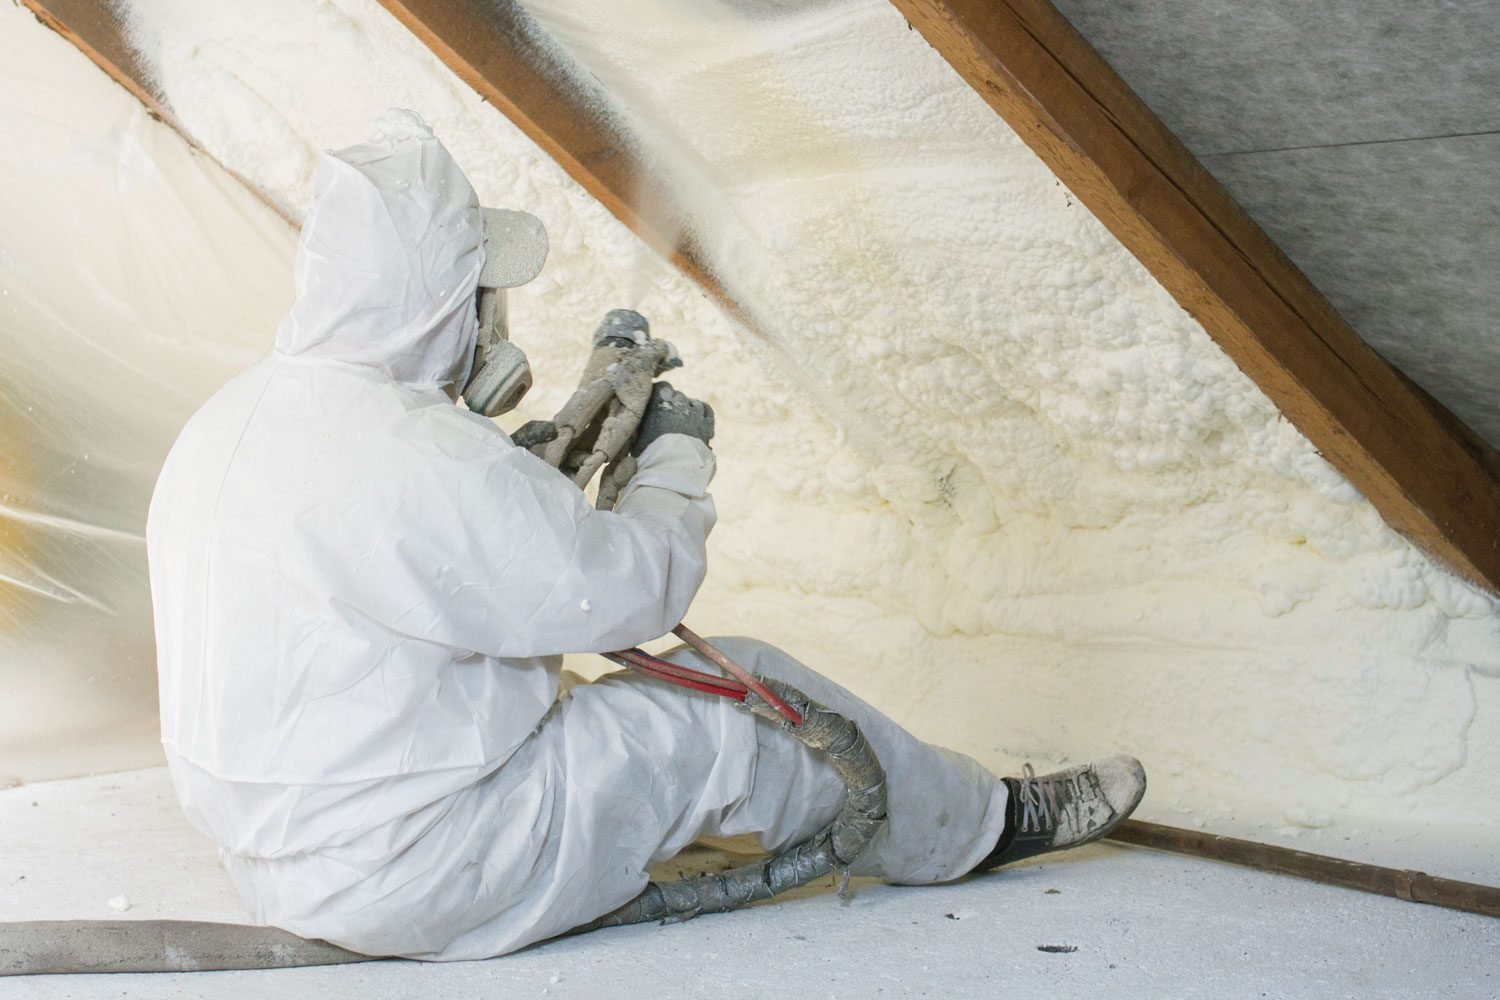 Technician uses spray gun for polyurethane foam to insulate home attic in a residential setting